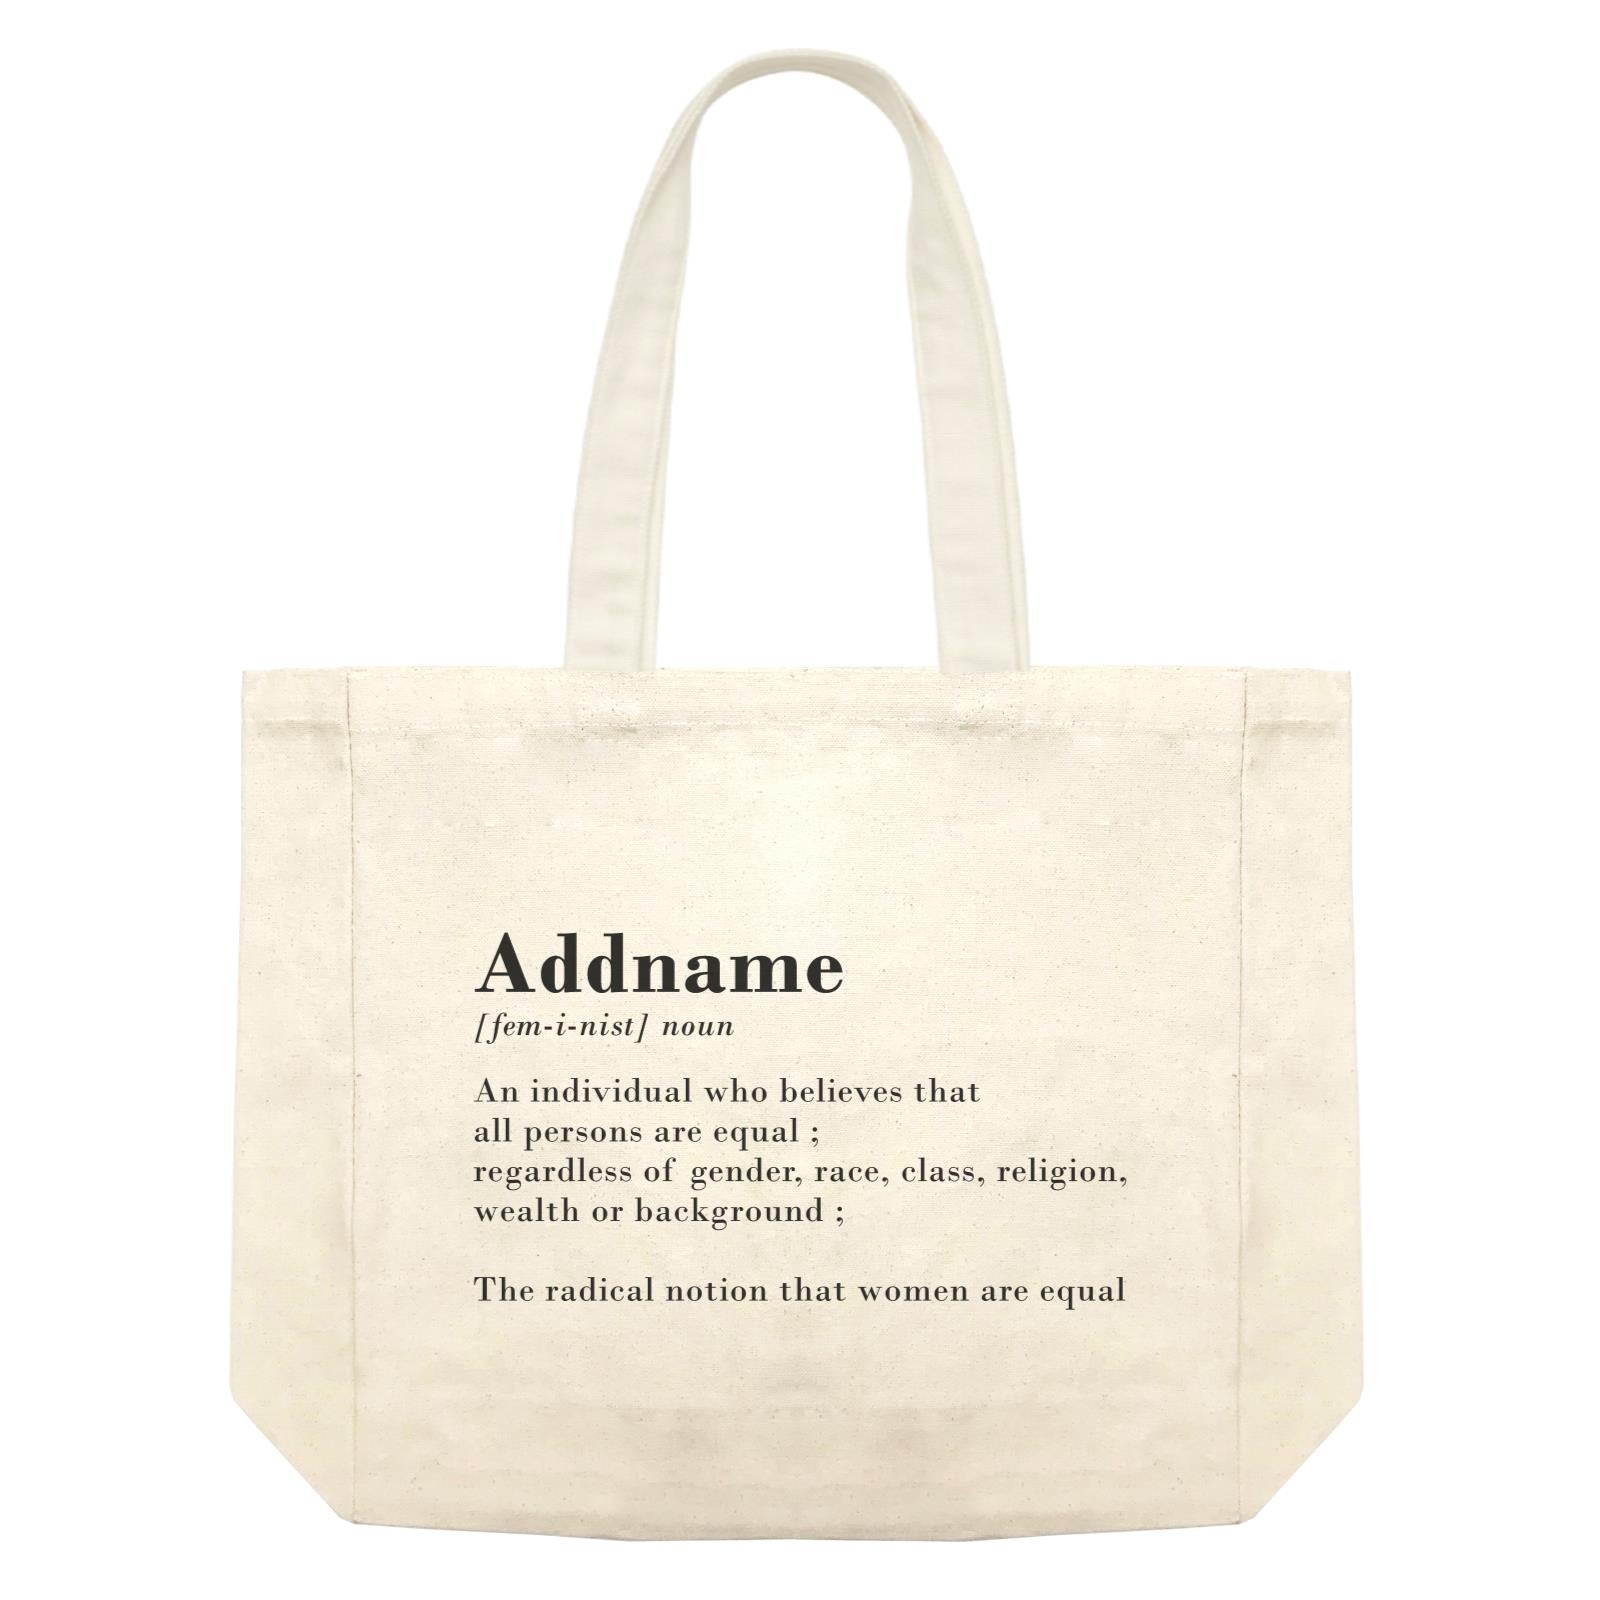 Best Friends Quotes Addname Feminist Noun Meaning Shopping Bag